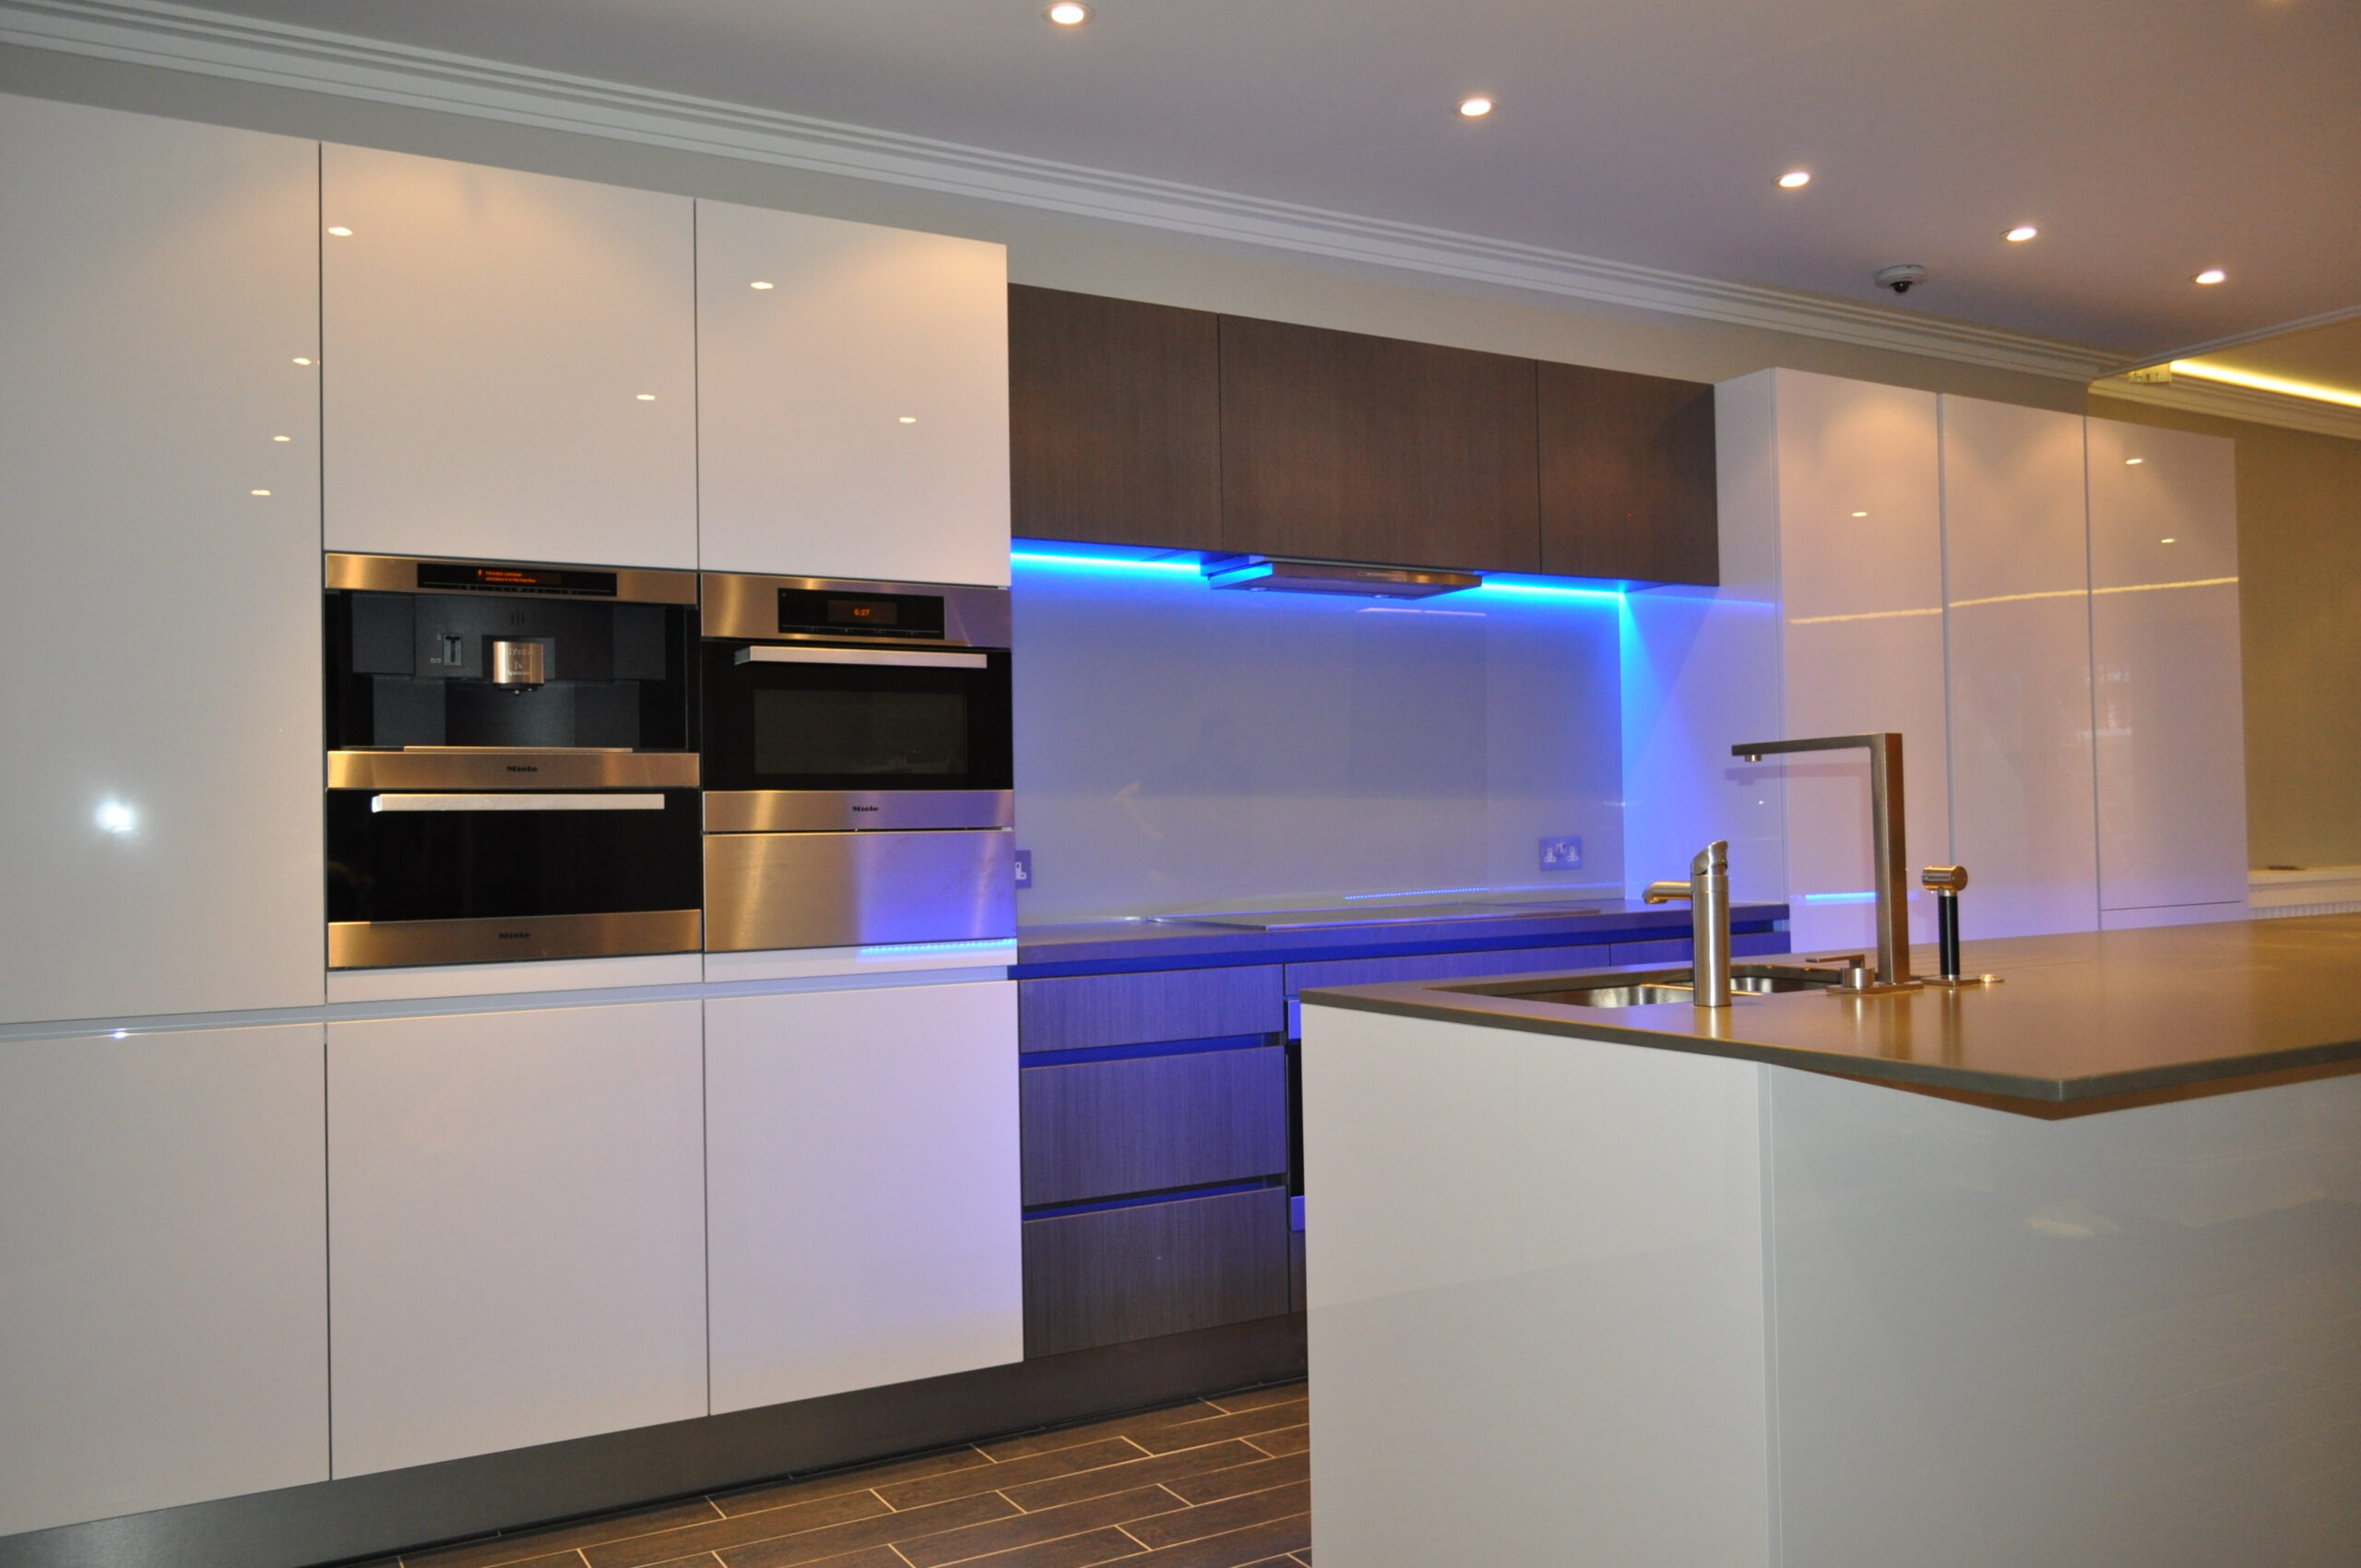 A Kitchen Cooking Station With Blue Lights